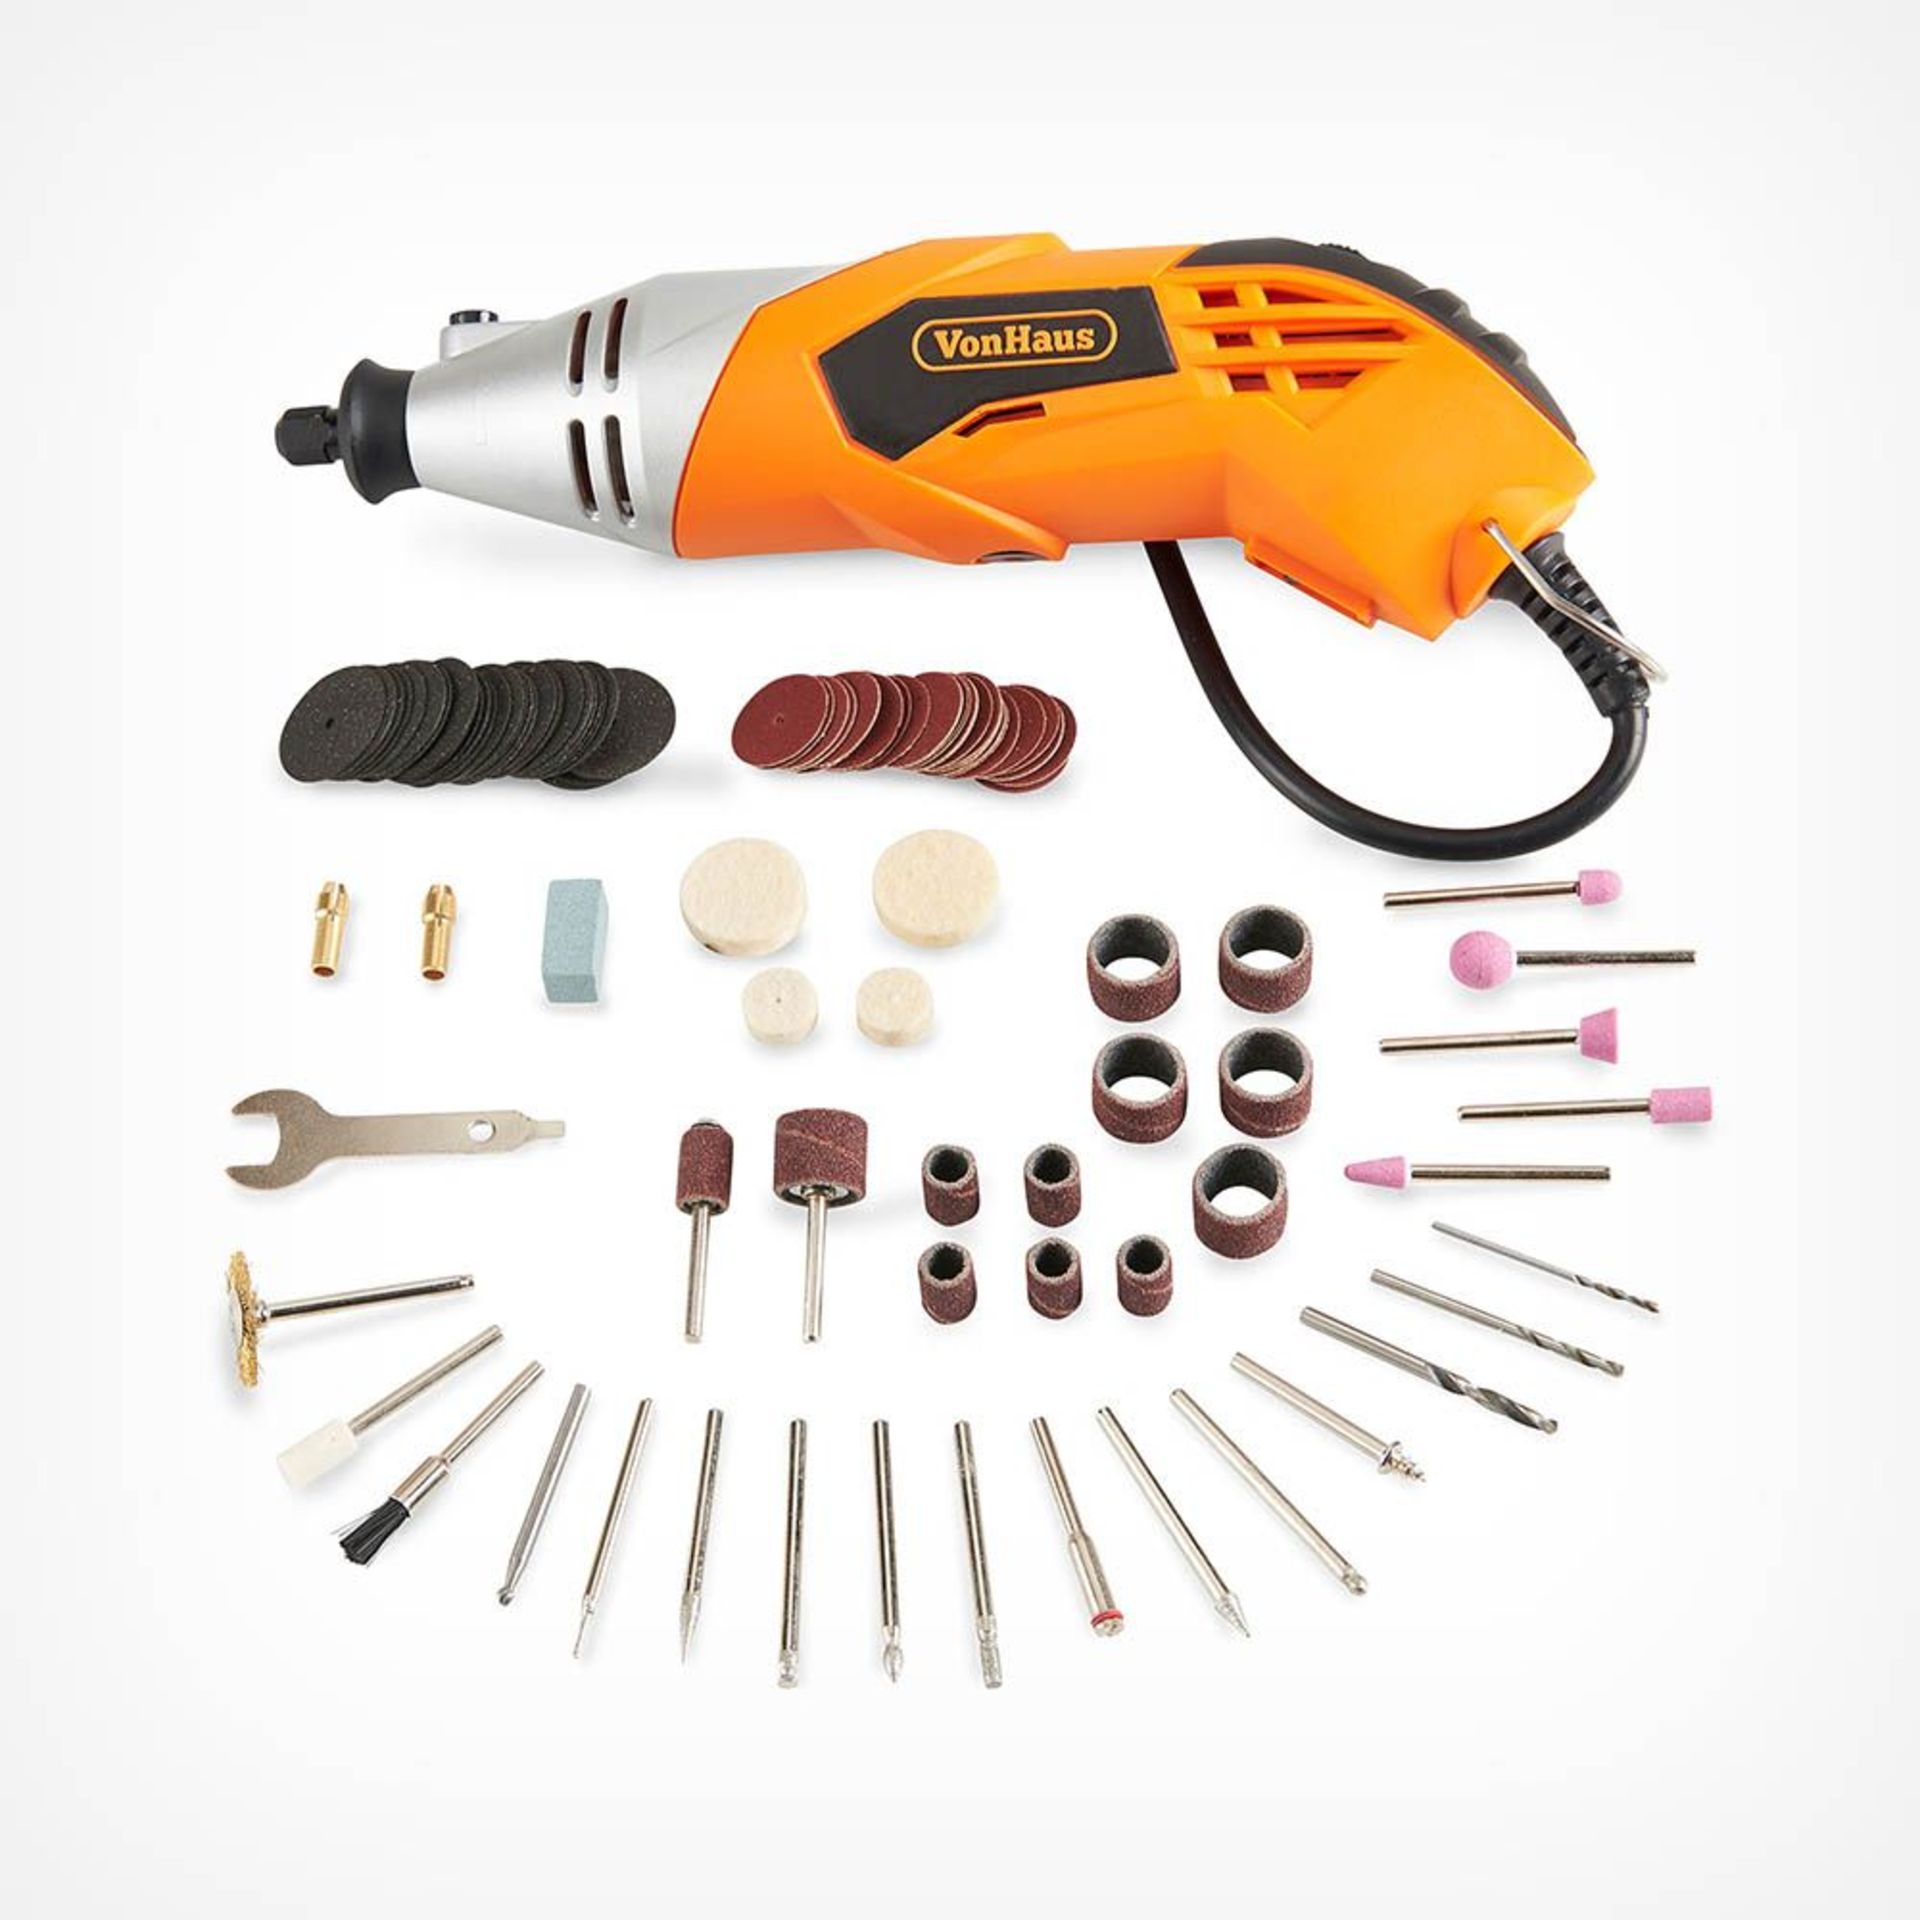 Rotary Multitool & Accessory Set. - BI. Ideal for a wide range of DIY, hobby, woodwork, jewellery